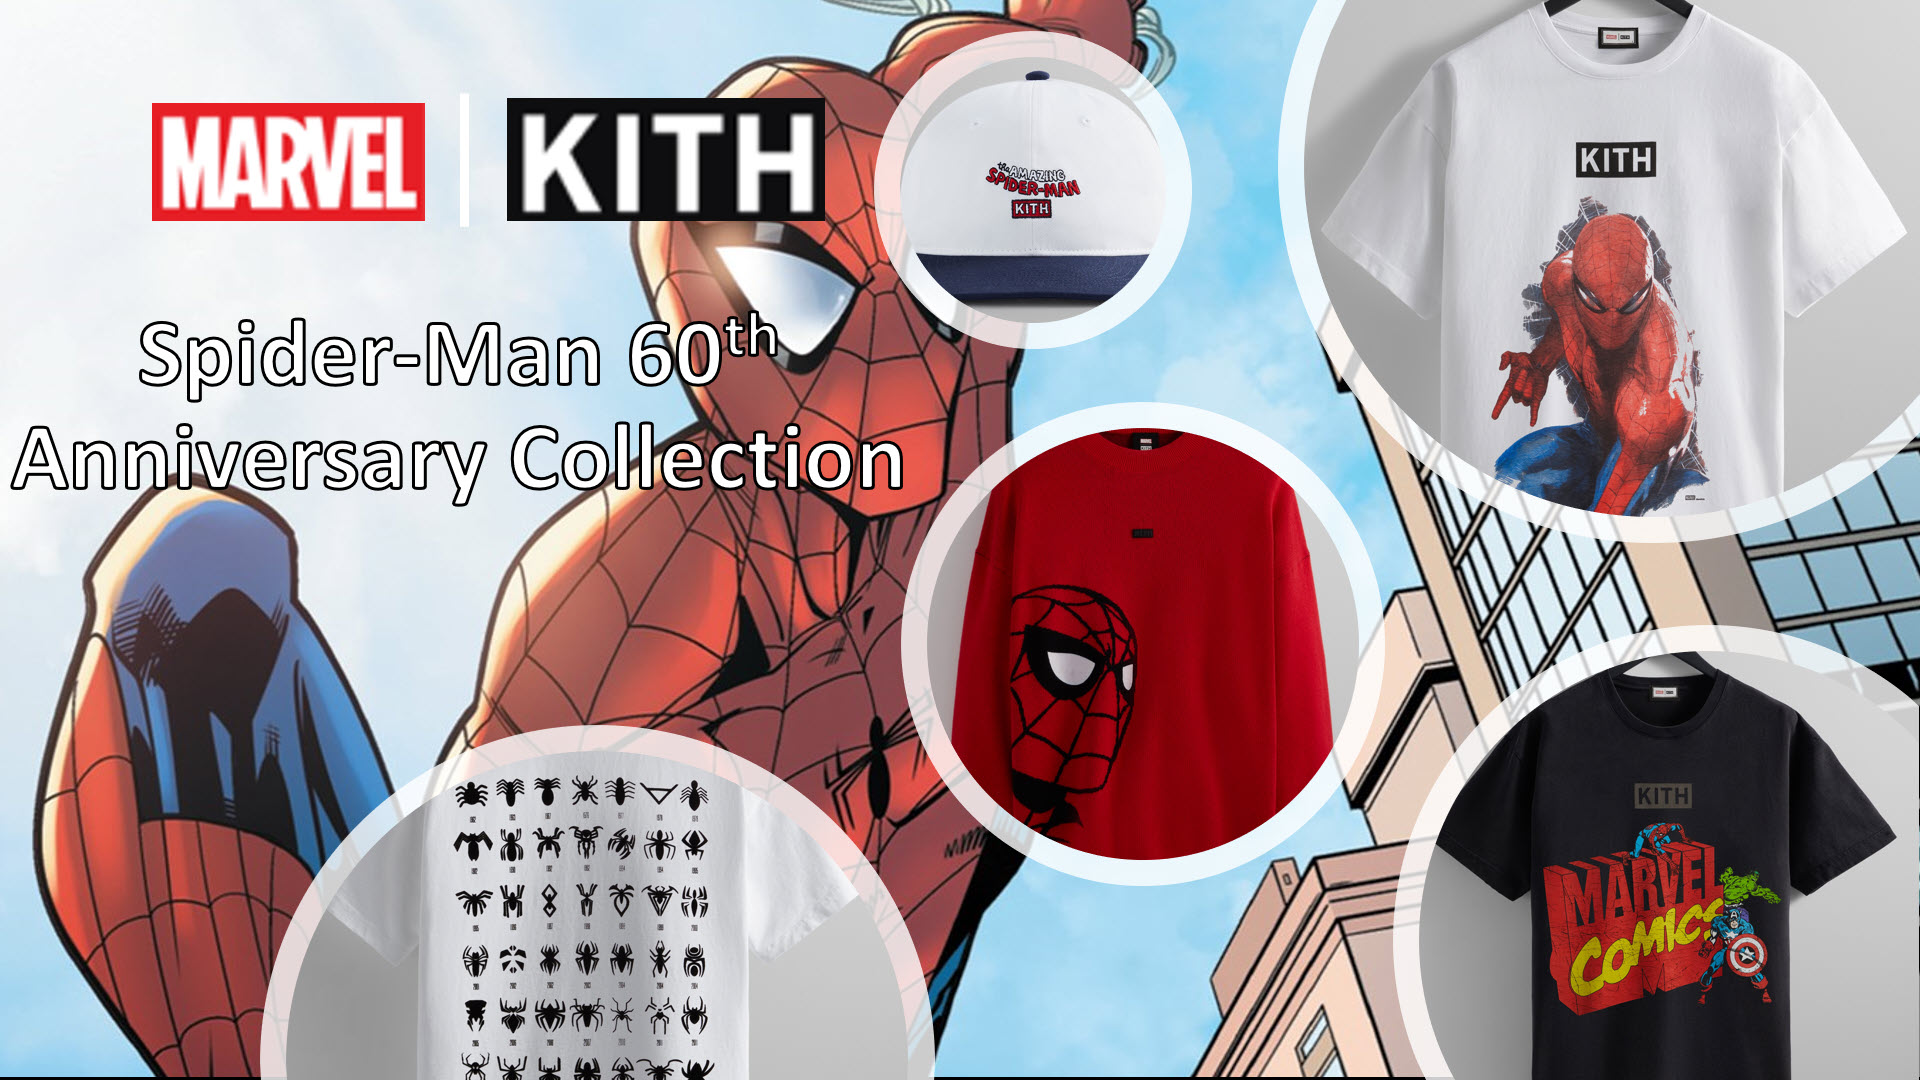 Marvel | Kith – Spider-Man 60th Anniversary Collection